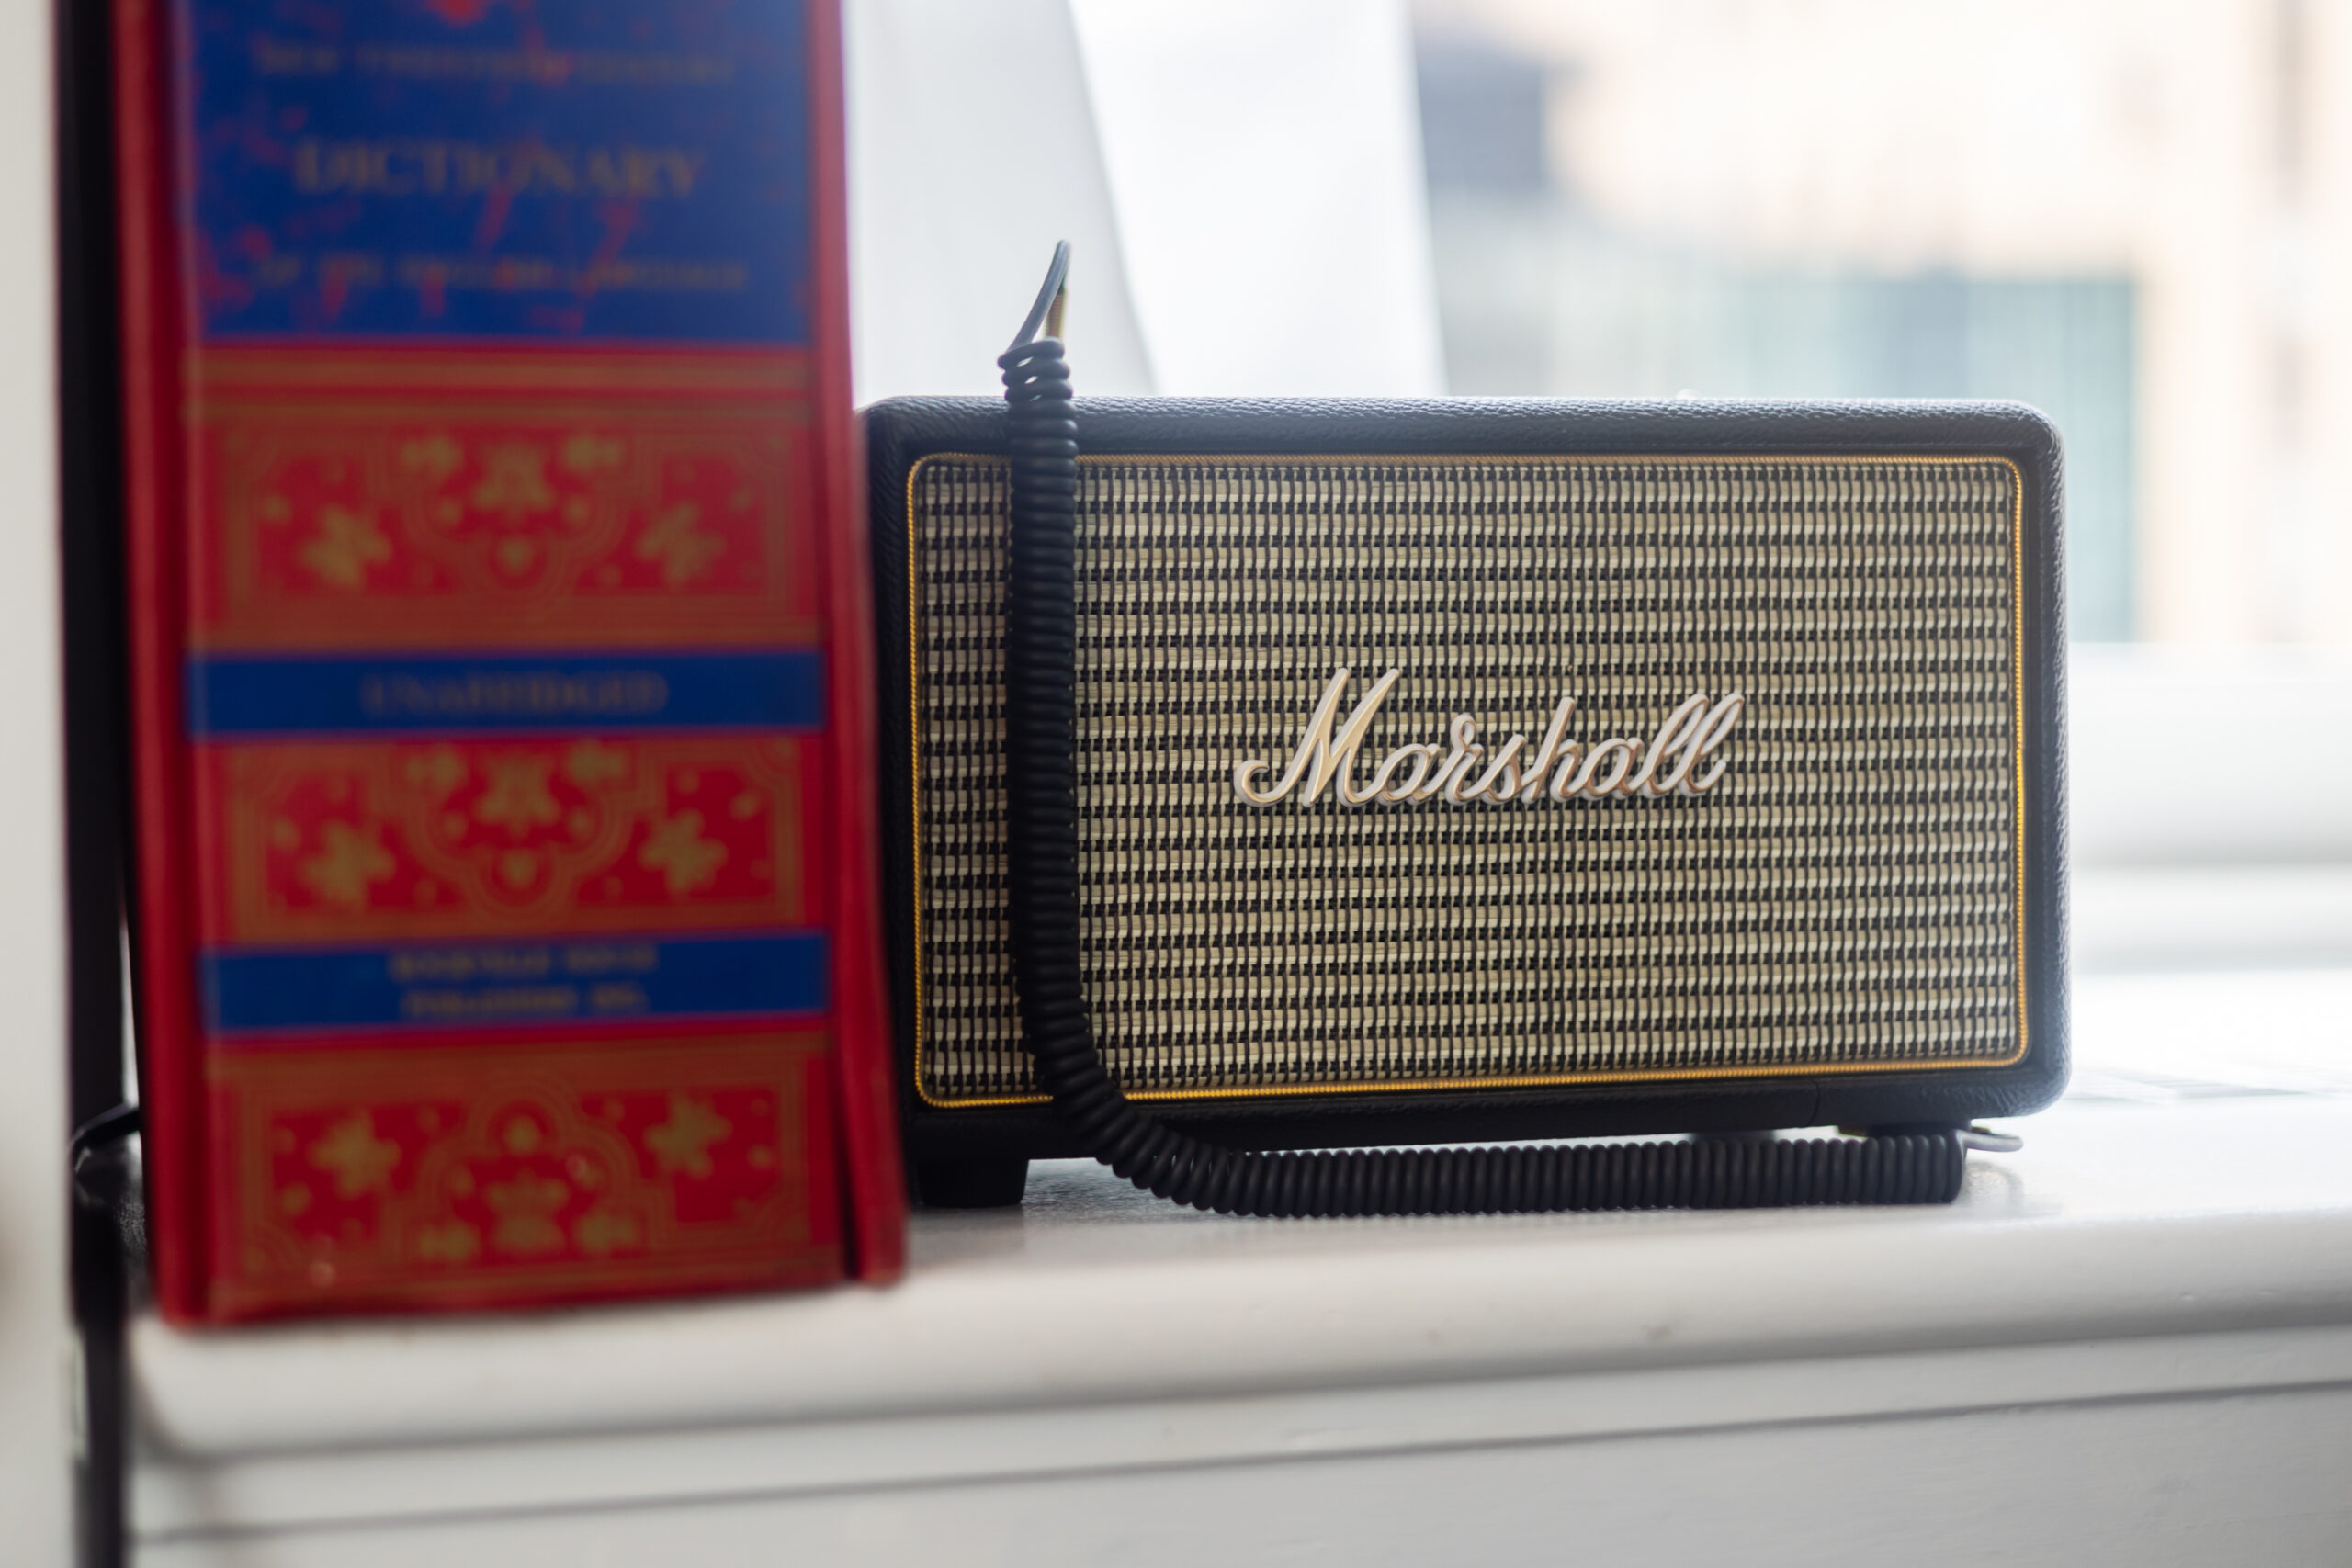 A close up of an old marshall radio